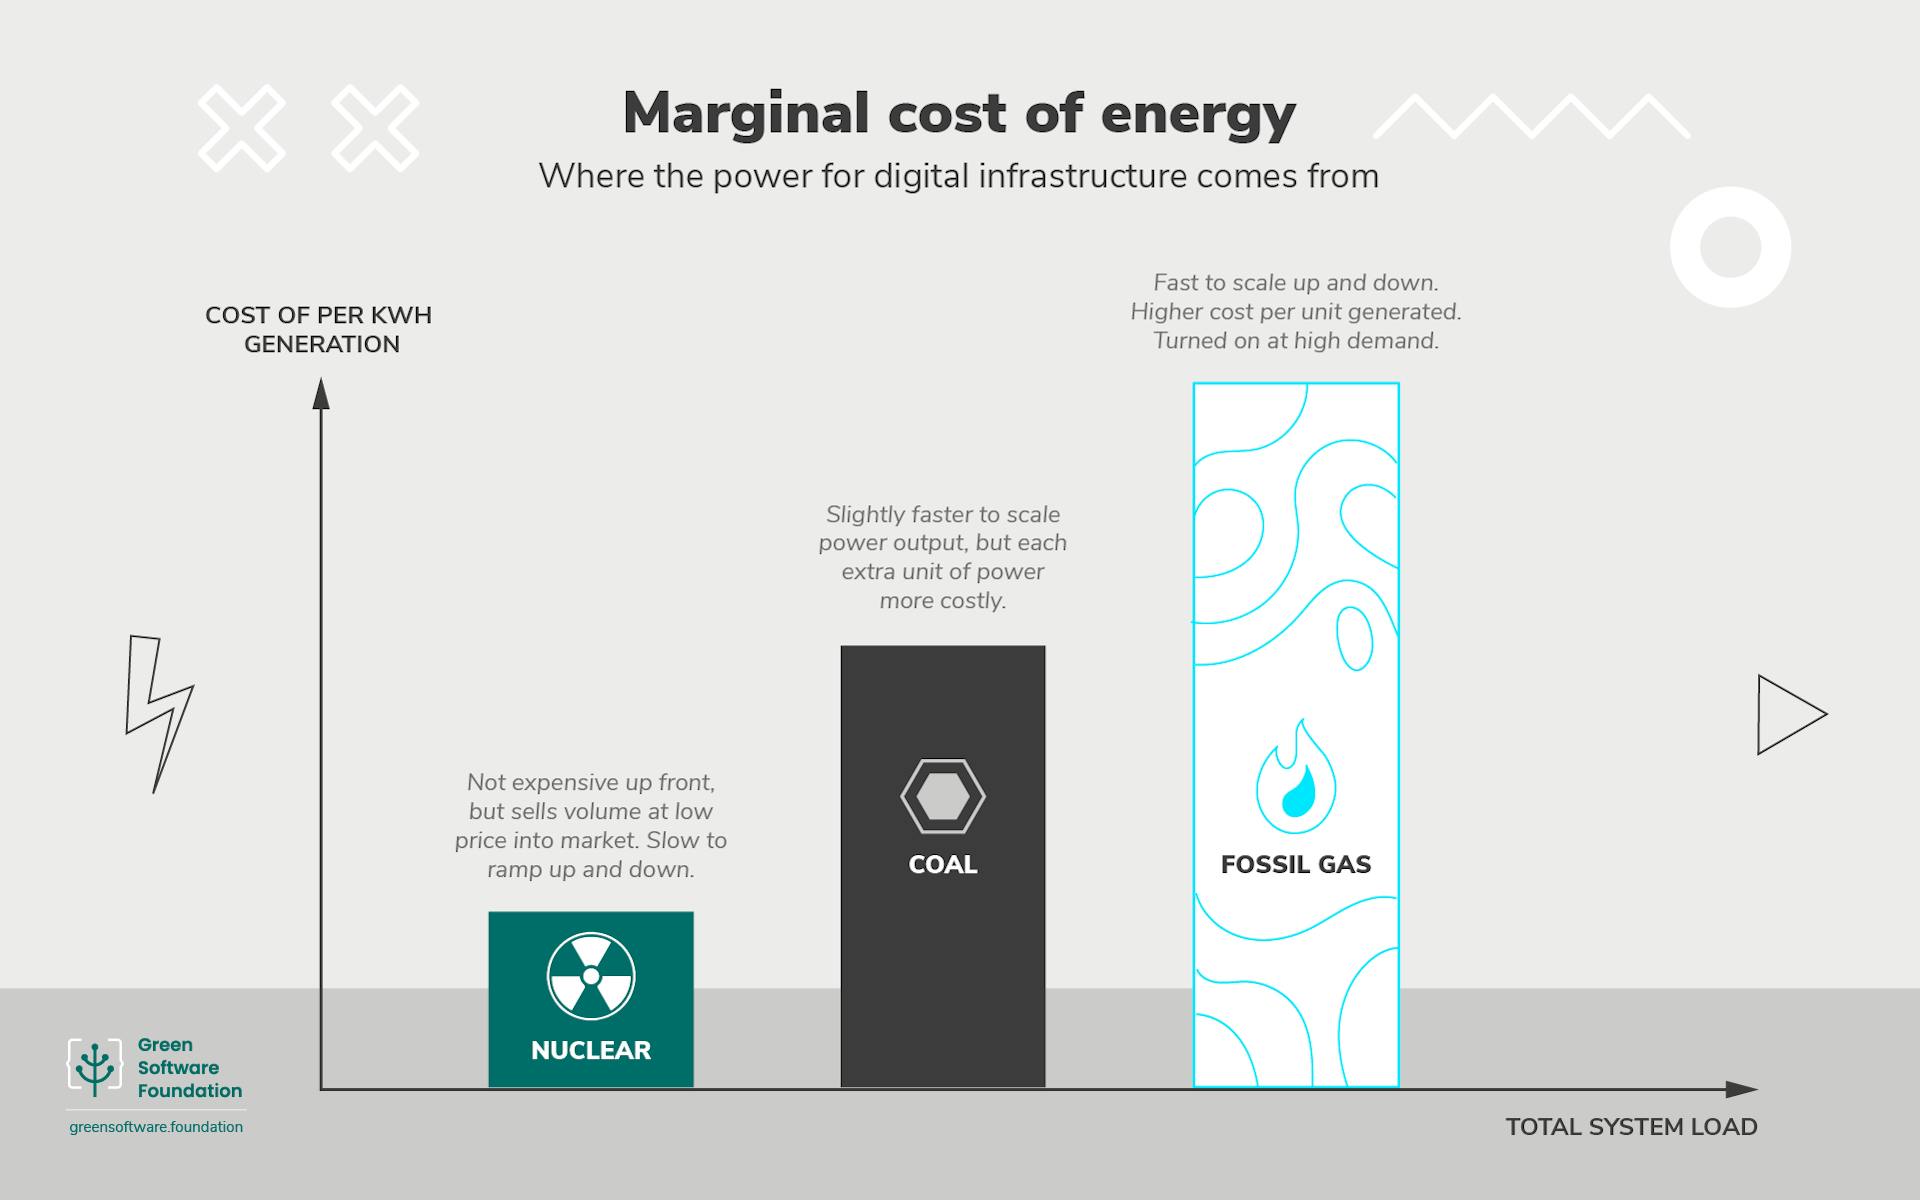 Comparing-marginal-costs-of-nuclear-coal-and-fossil-gas